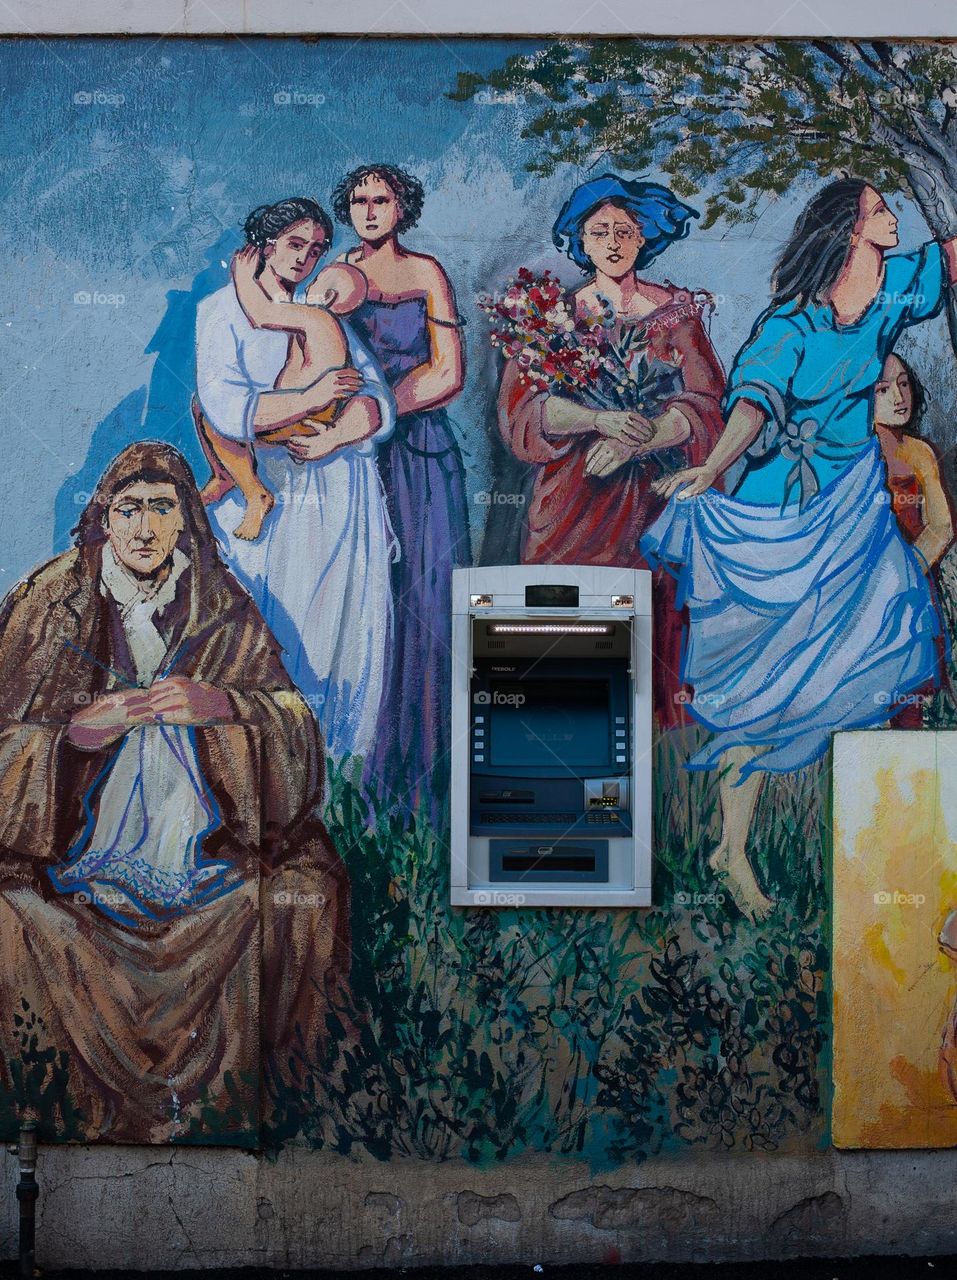 An ATM in the middle of a mural artistry in Orgosolo - Sardinia